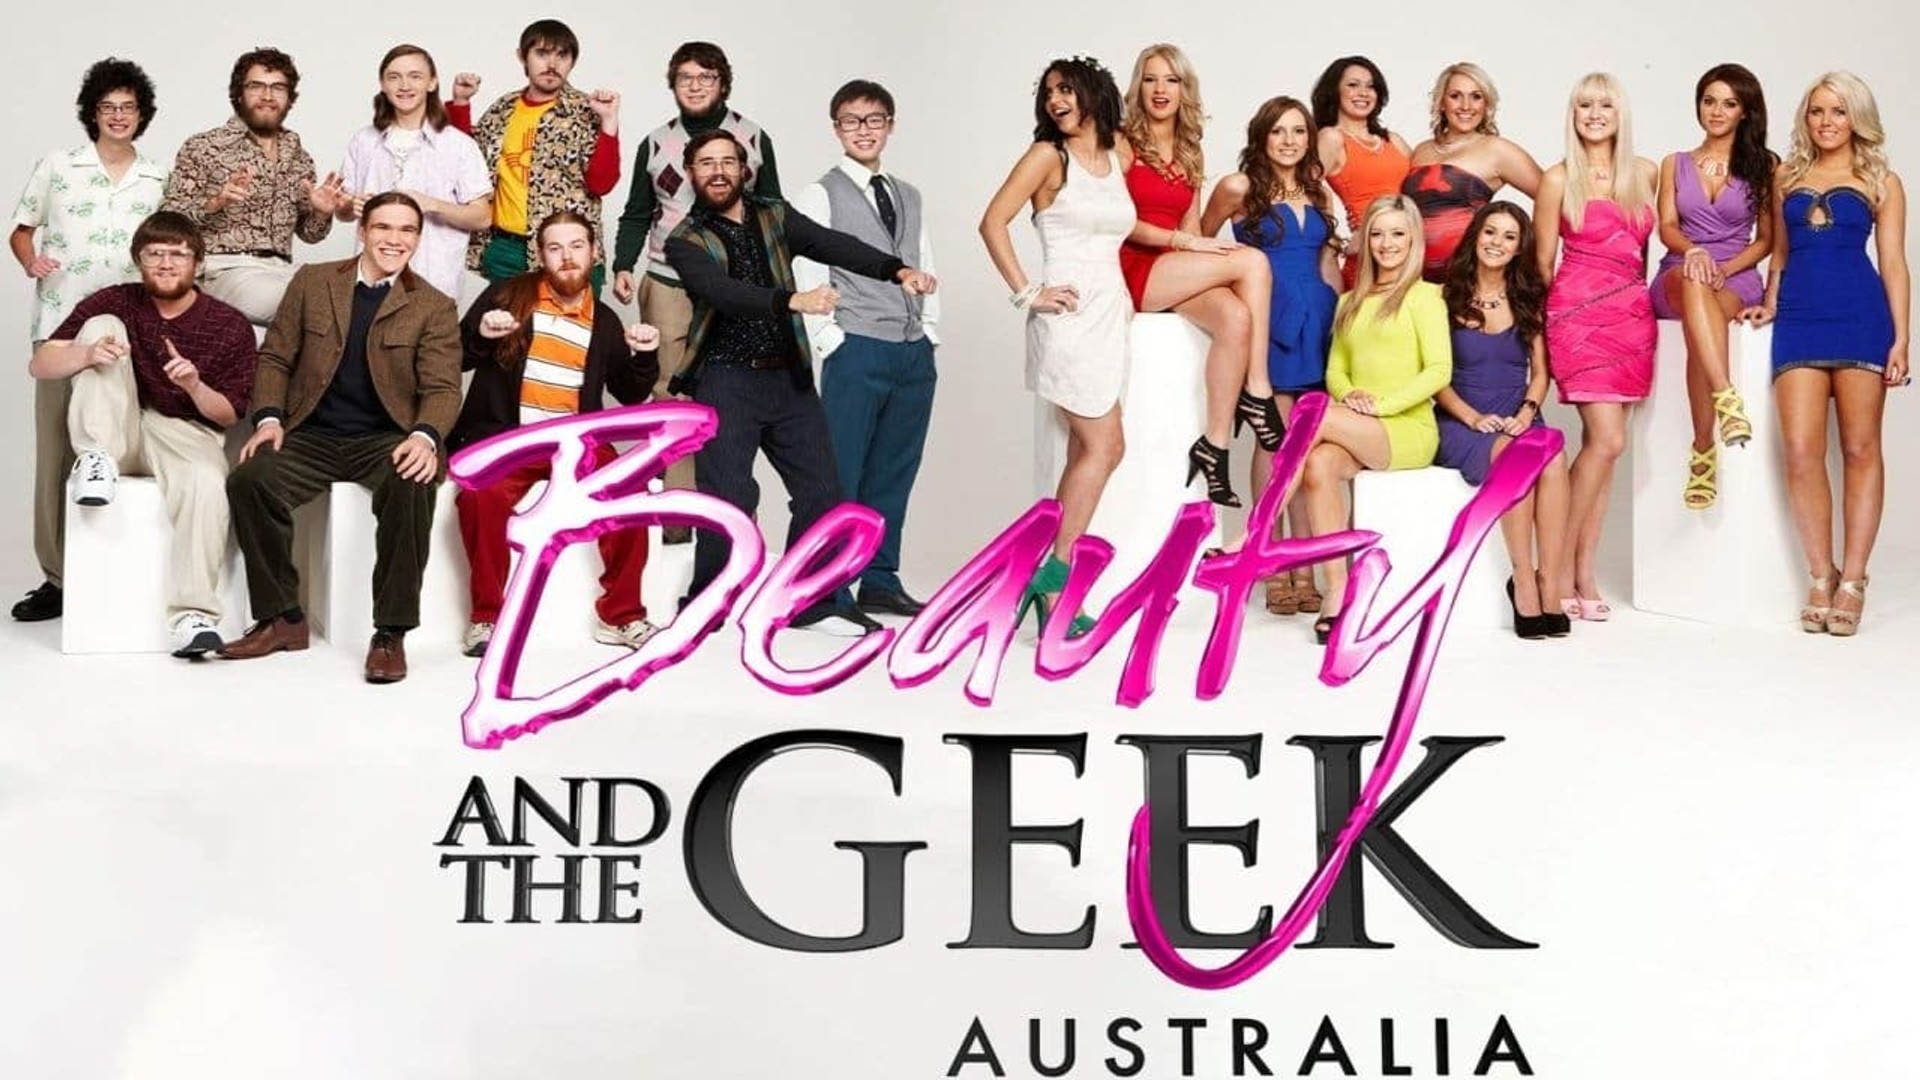 Beauty and the Geek Australia background